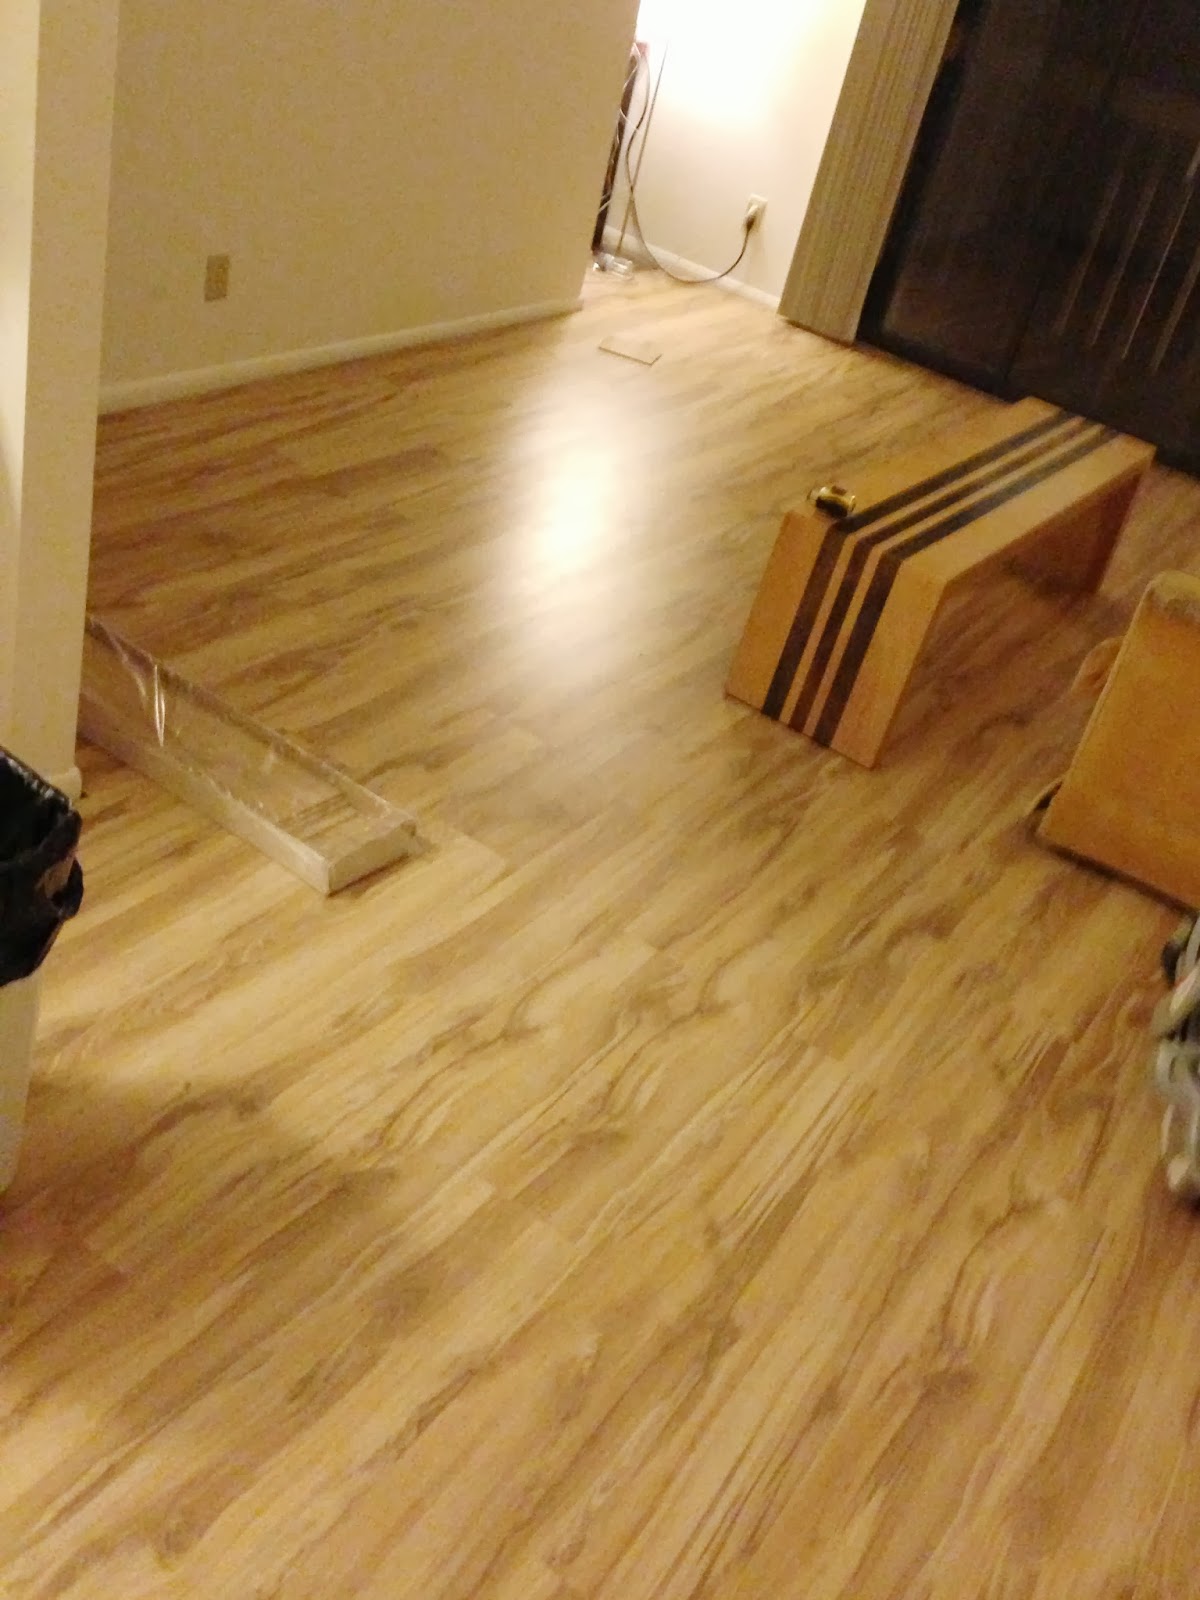 How We Put Hardwood Over Carpet Messymom, Can You Lay Laminate Flooring Over Carpet